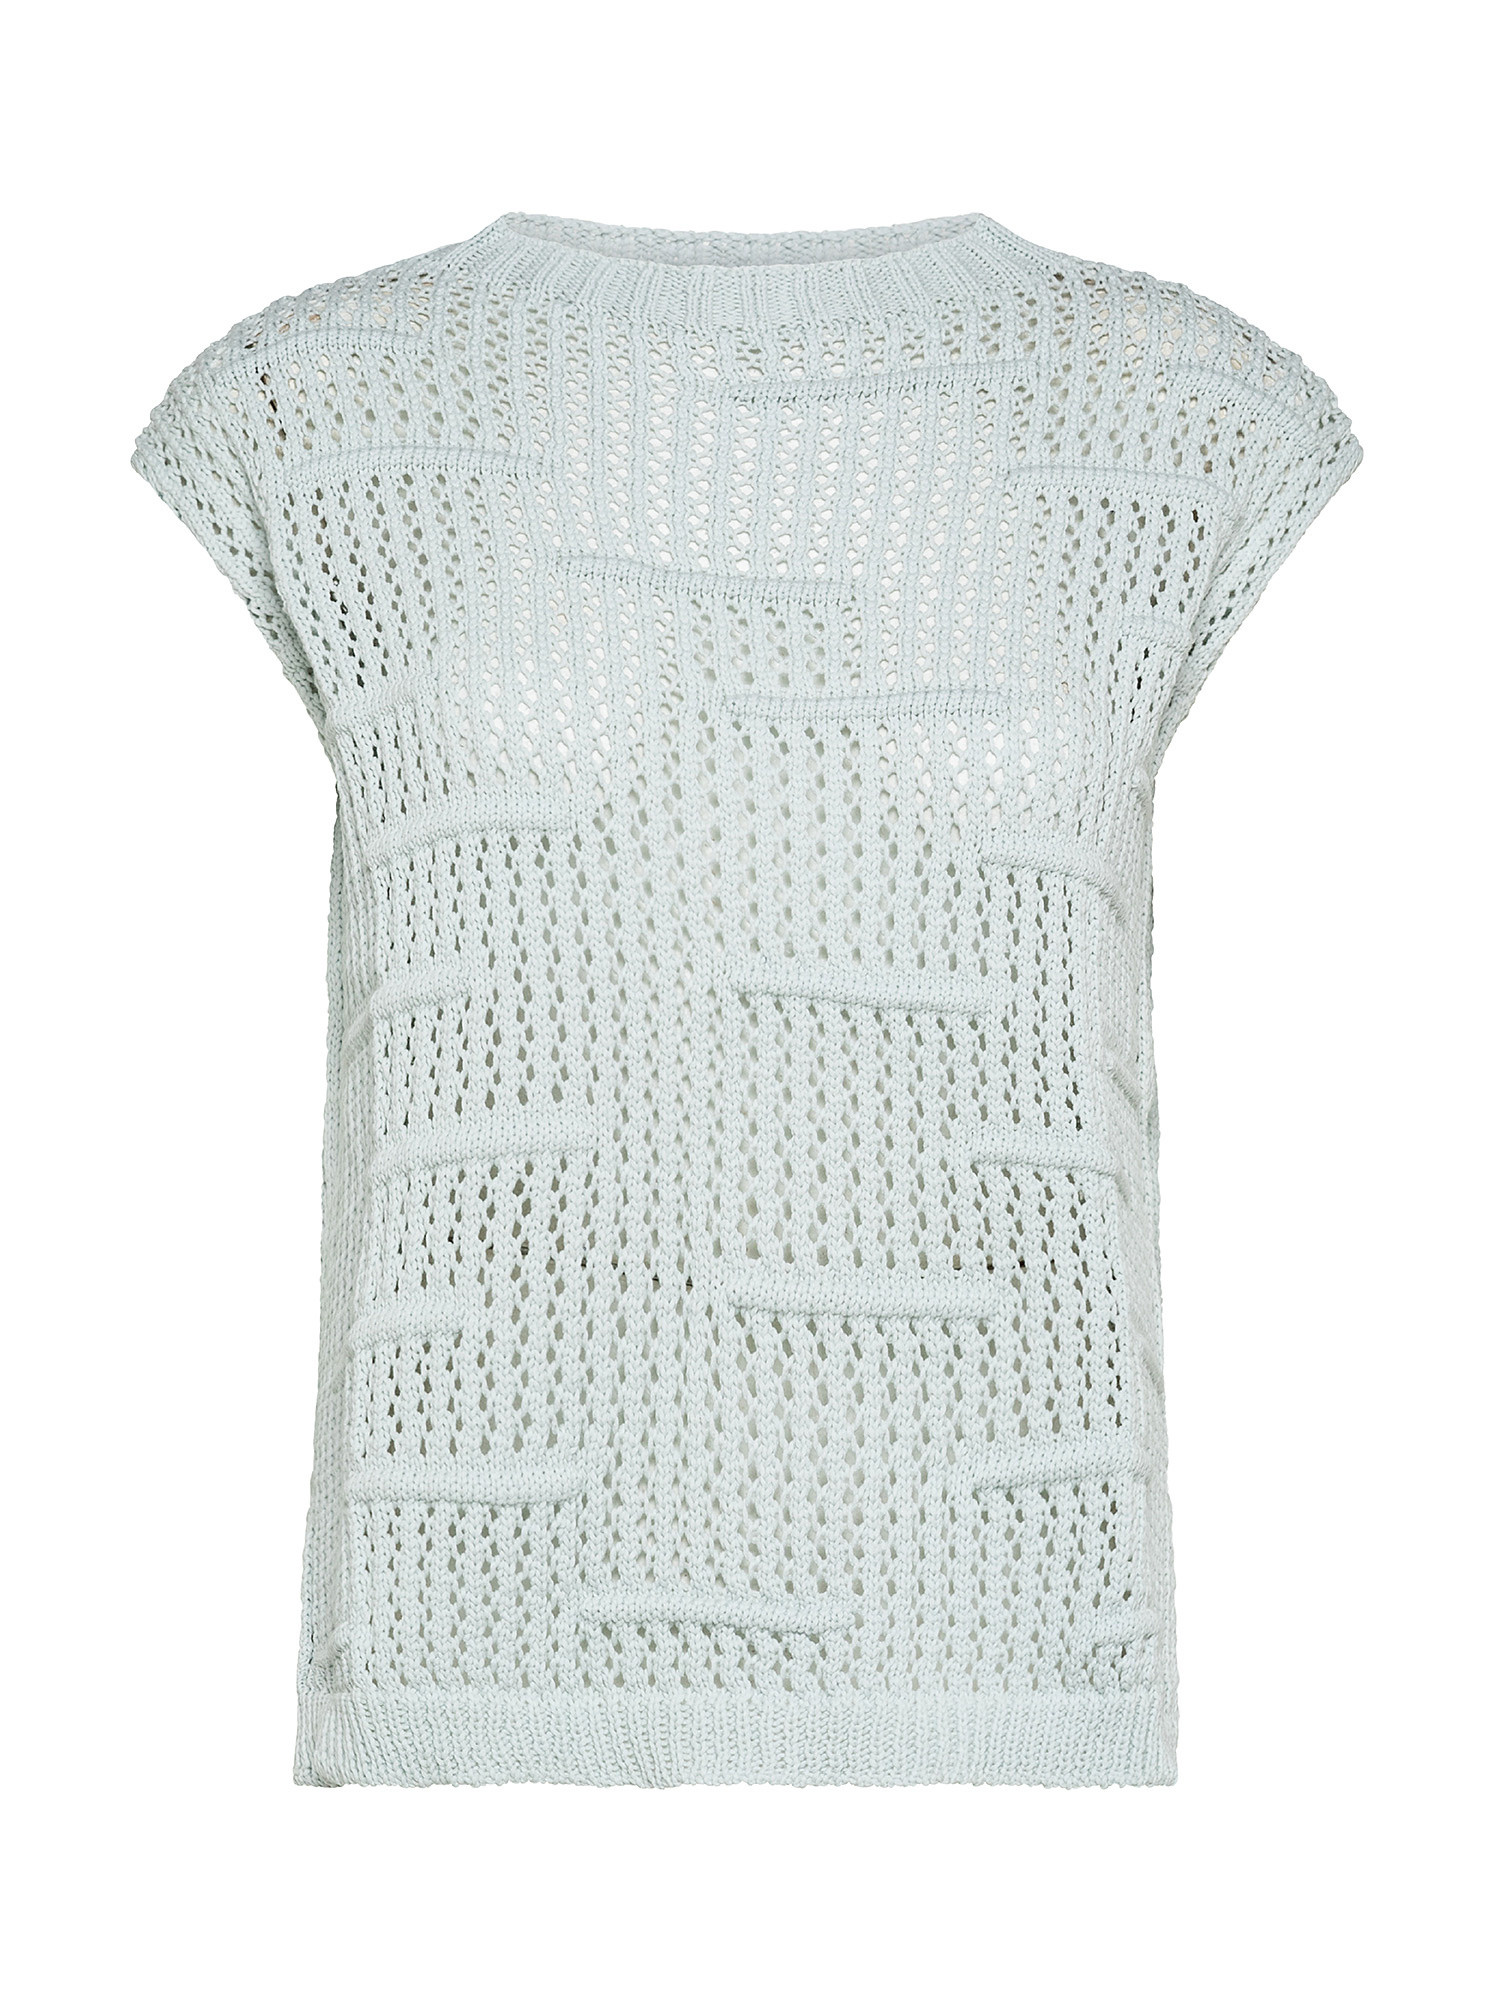 Tricot sweater, Light Grey, large image number 0